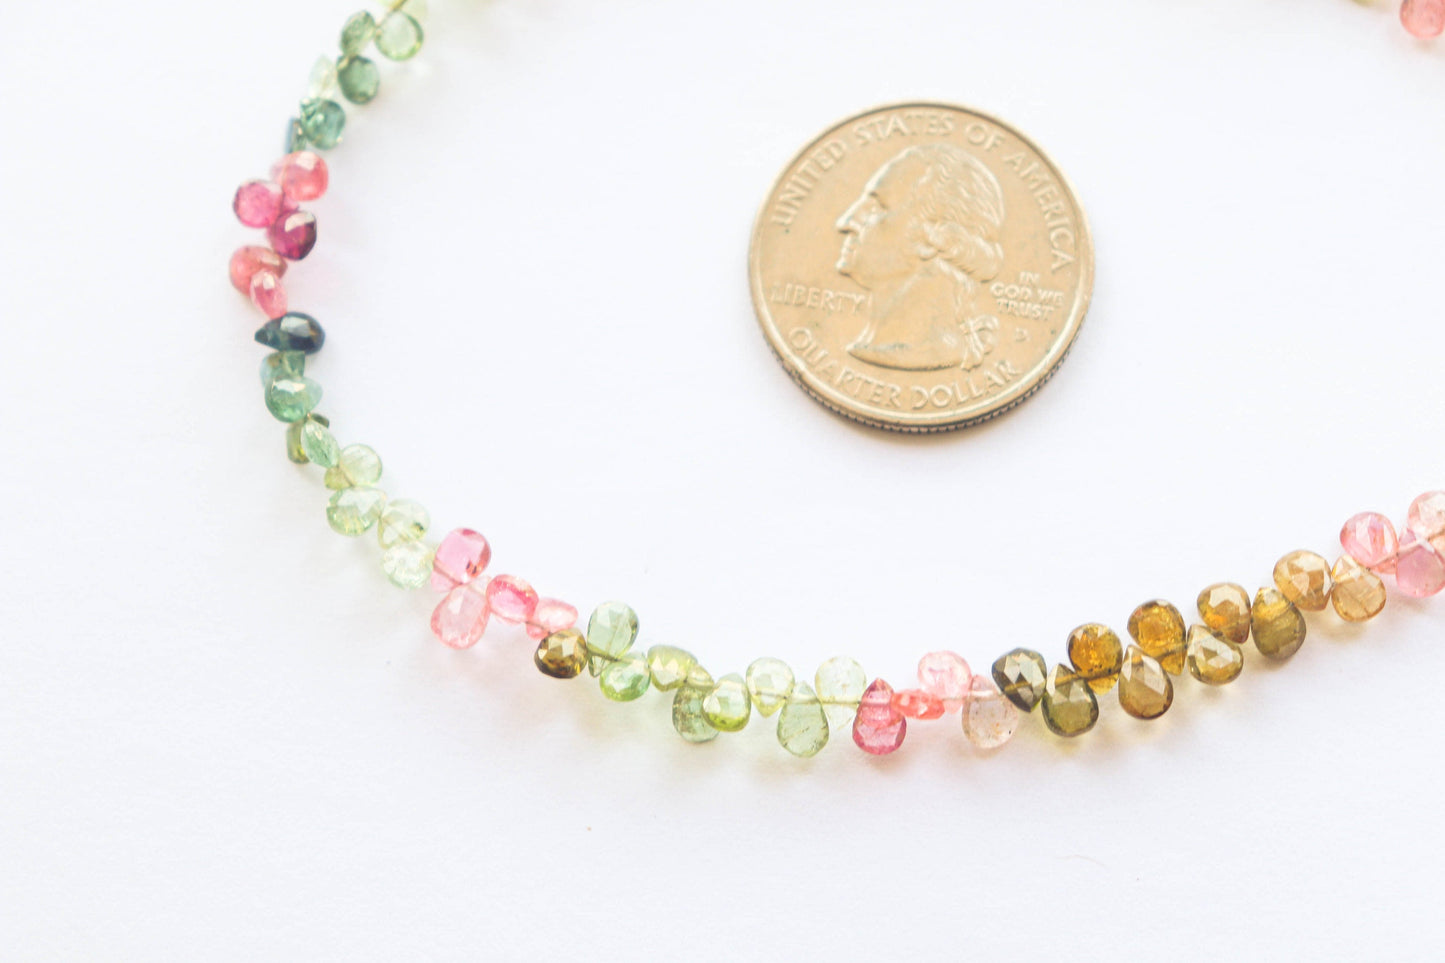 Multi Tourmaline Pear Faceted Briolette | 3x5mm | 10 inch Full String | 100 Pieces | Natural Tourmaline Gemstone | Beadsforyourjewellery | 902 Beadsforyourjewelry